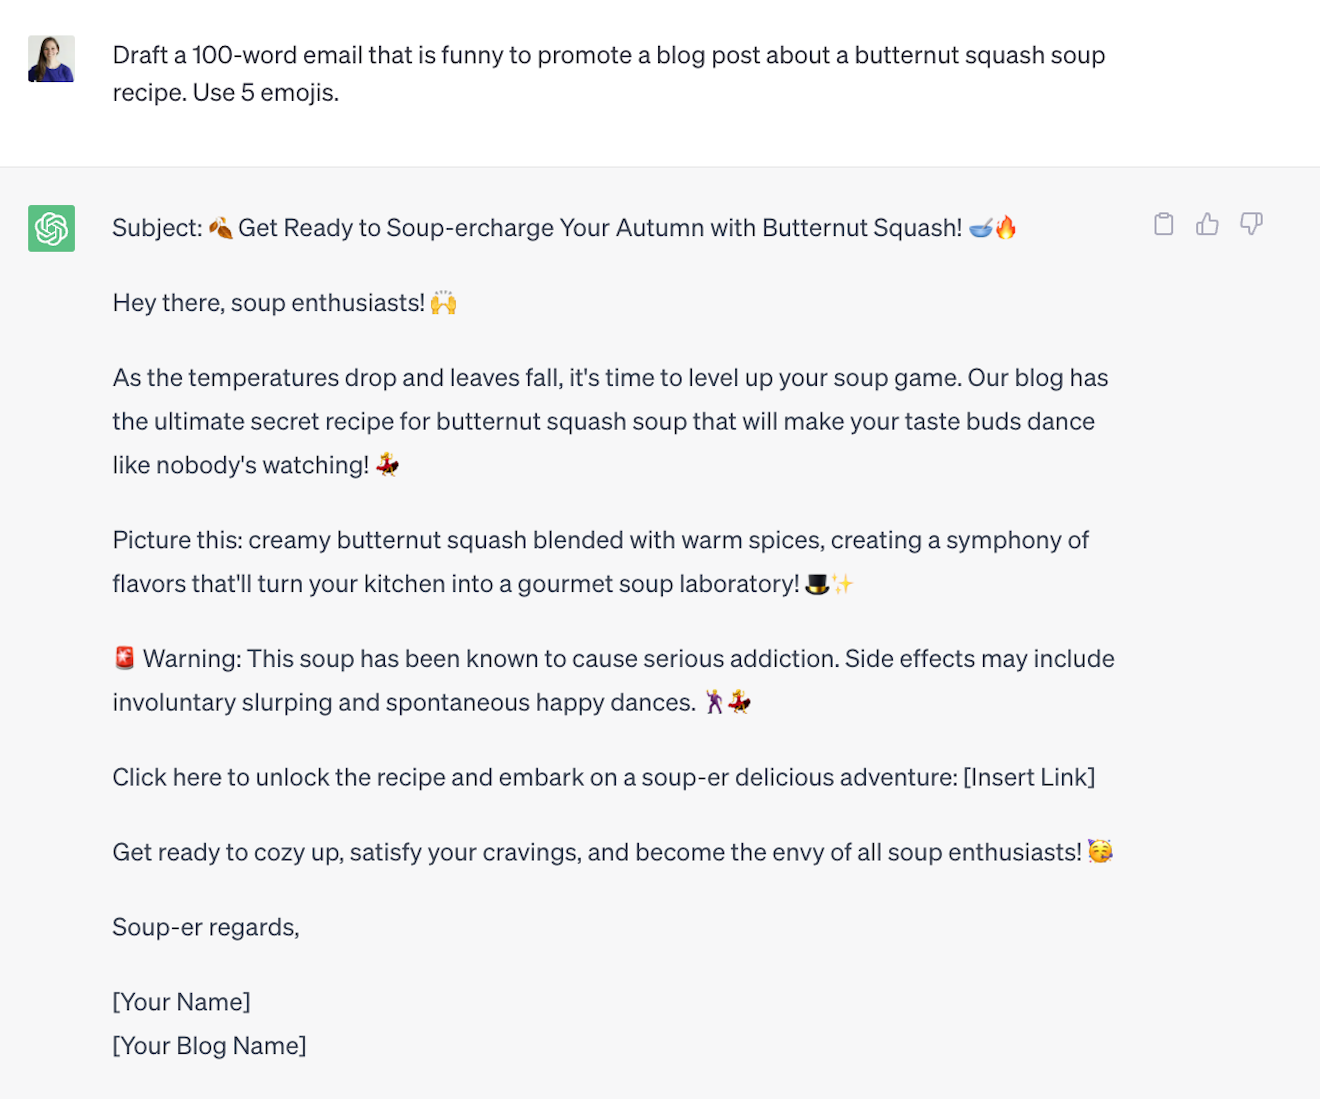 A screenshot of a ChatGPT conversation with the prompt: "Draft a 100-word email that is funny to promote a blog post about a butternut squash soup recipe. Use 5 emojis."